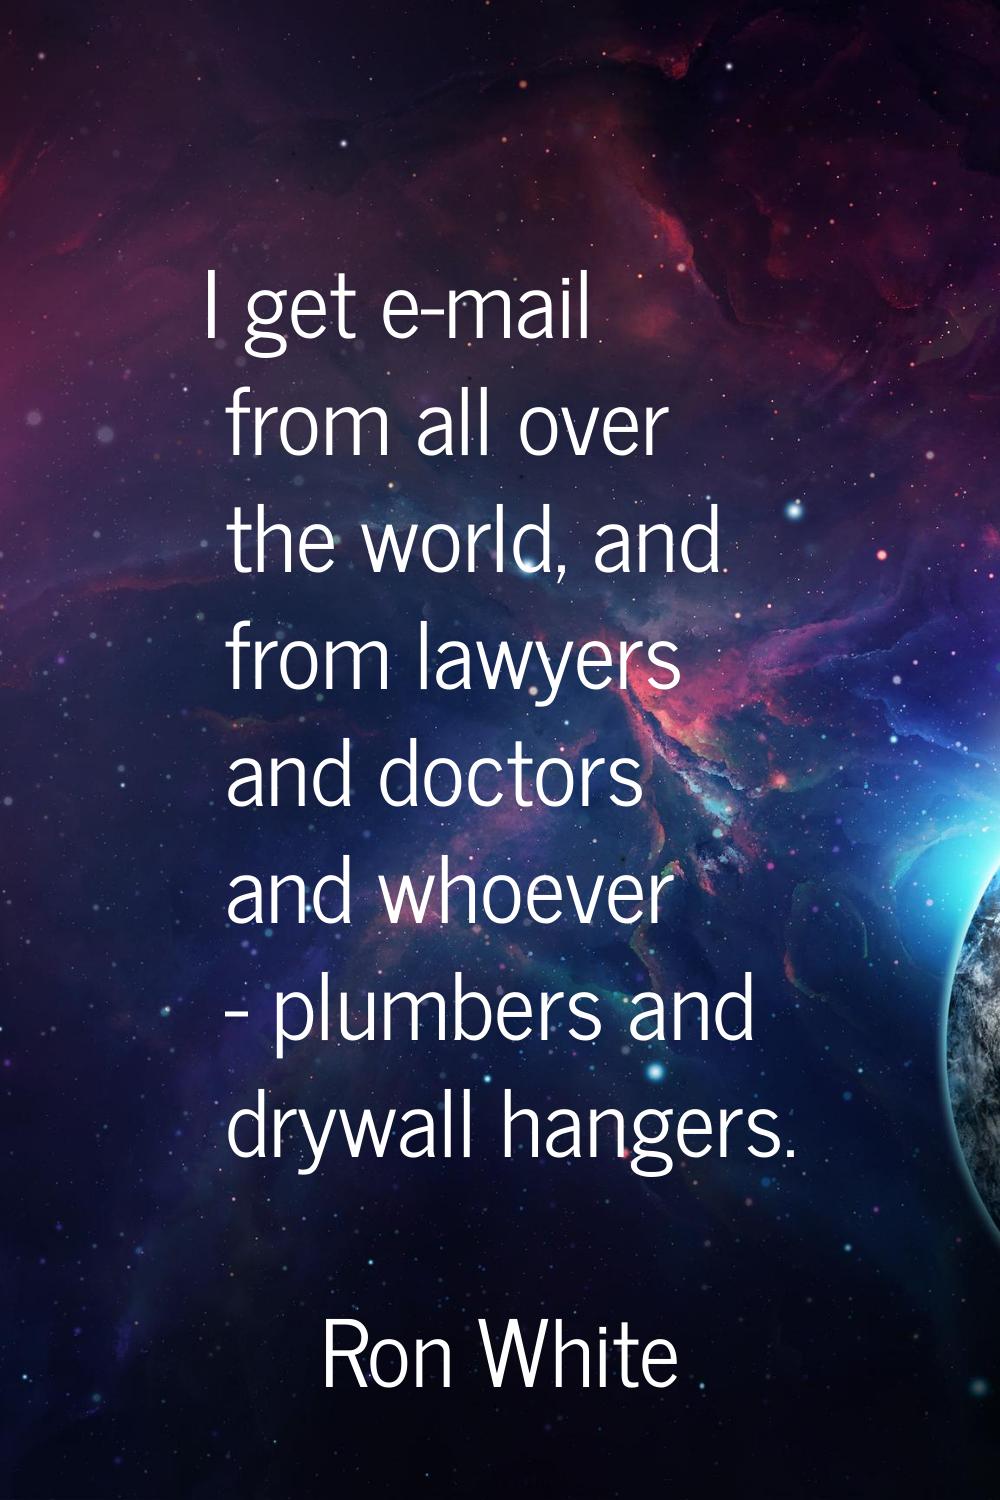 I get e-mail from all over the world, and from lawyers and doctors and whoever - plumbers and drywa